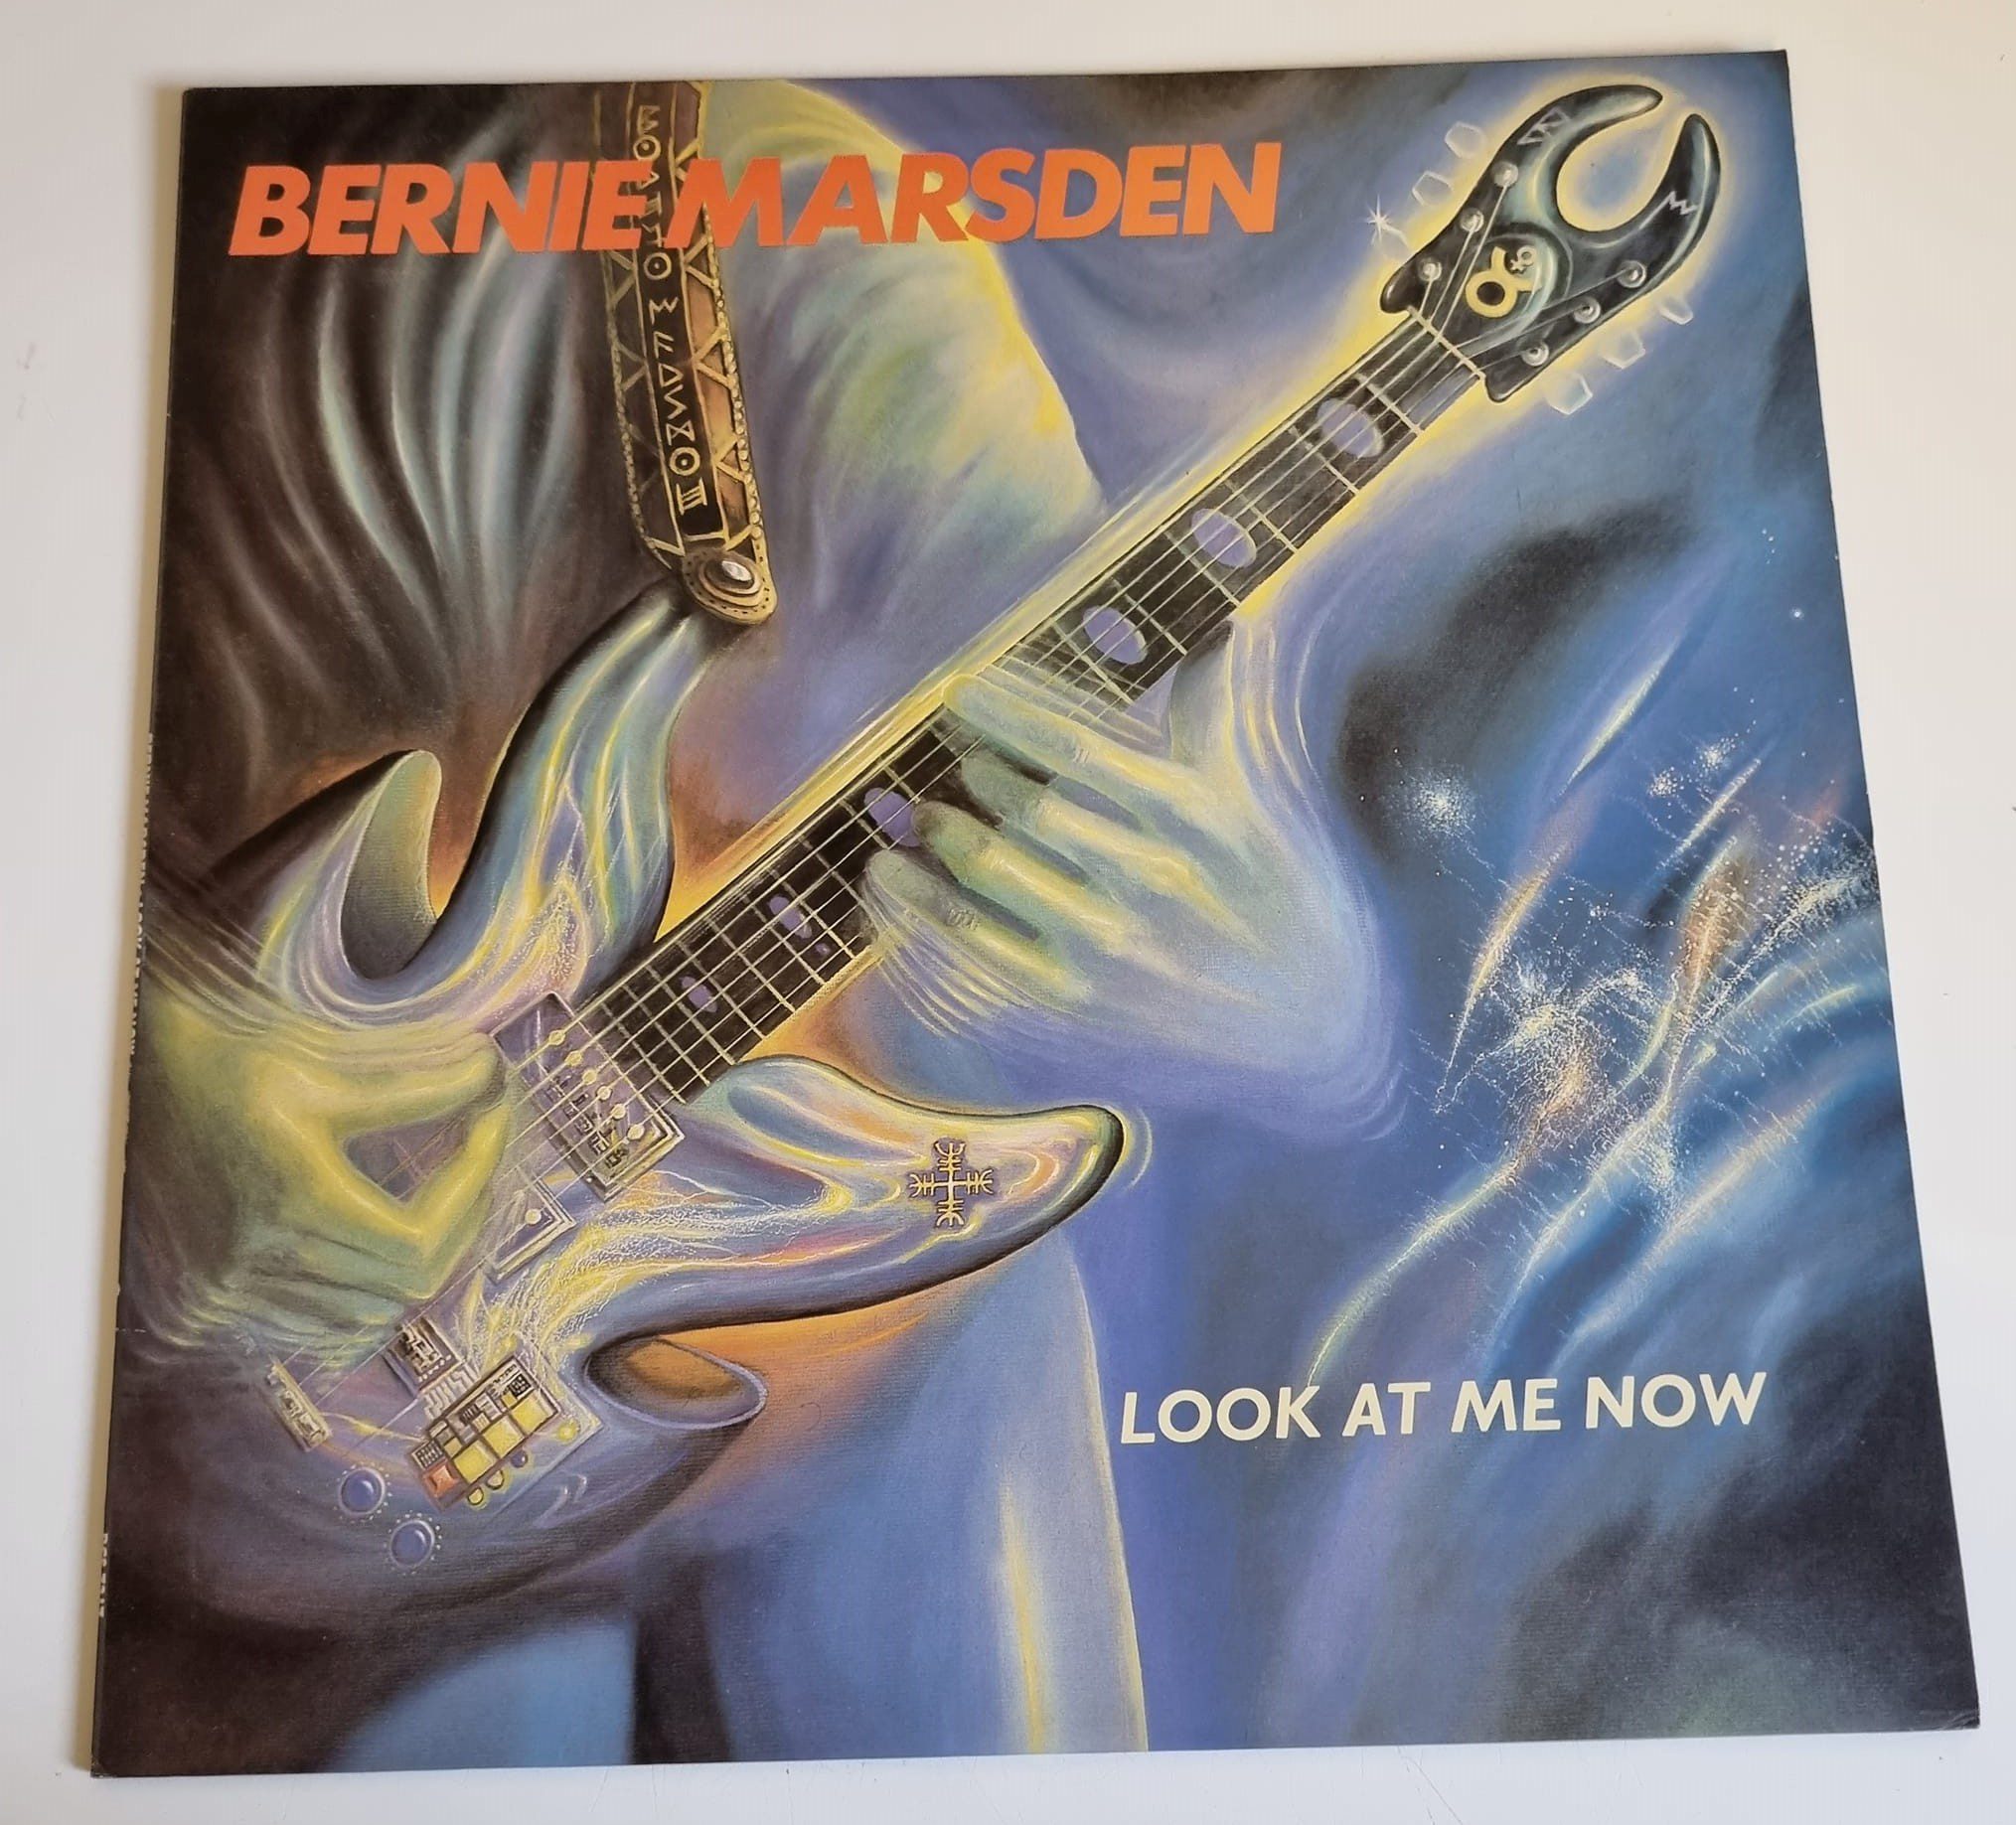 Buy this rare Bernie Marsden record by clicking here